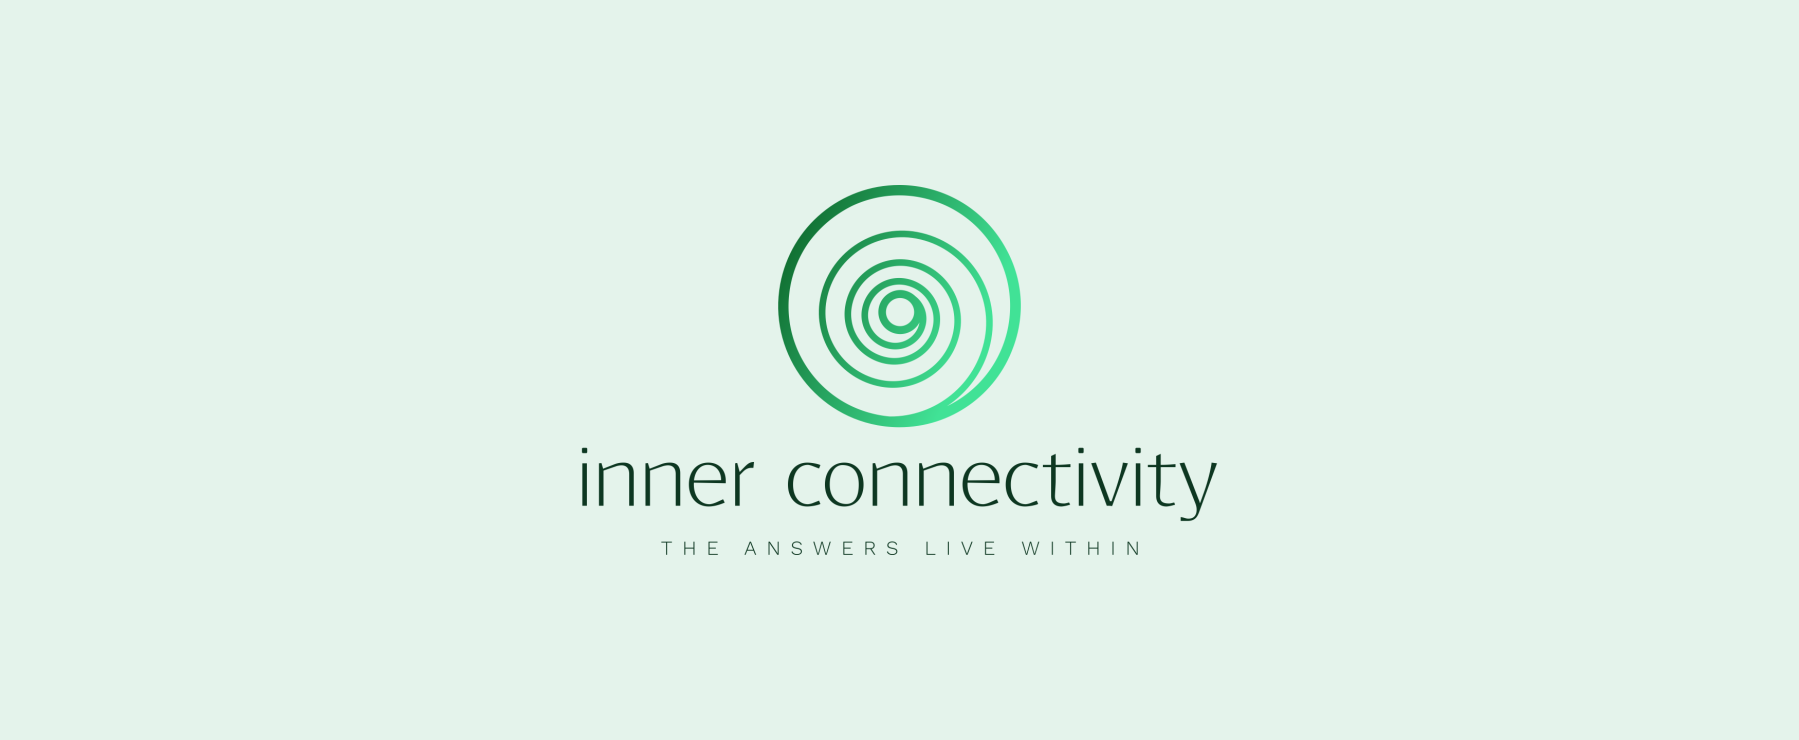 inner connectivity | The Answers Live Within